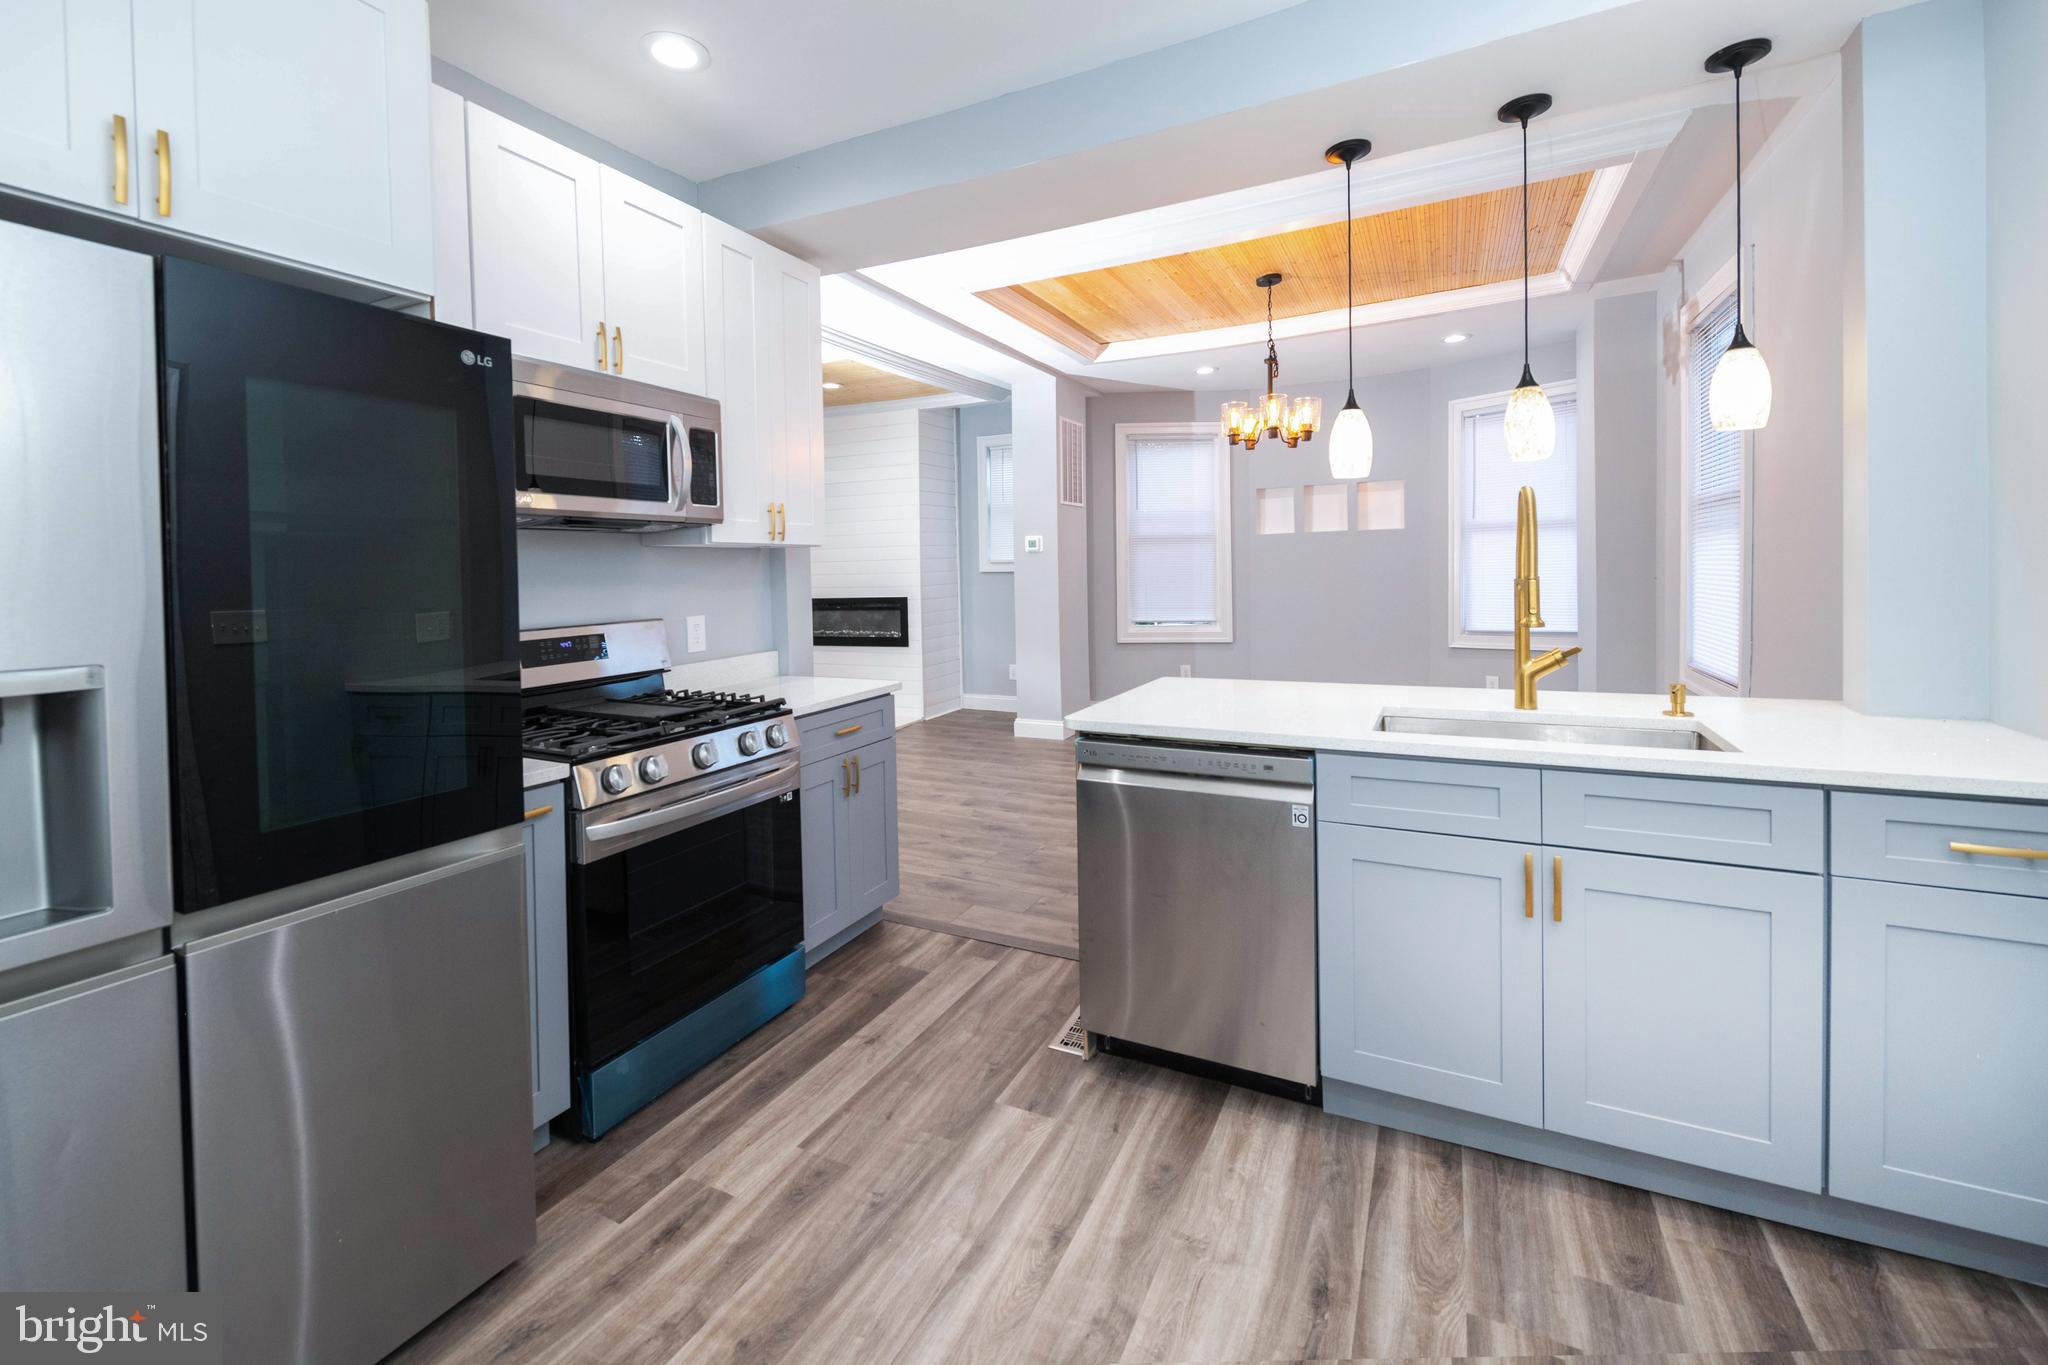 a kitchen with stainless steel appliances a sink cabinets and a wooden floor